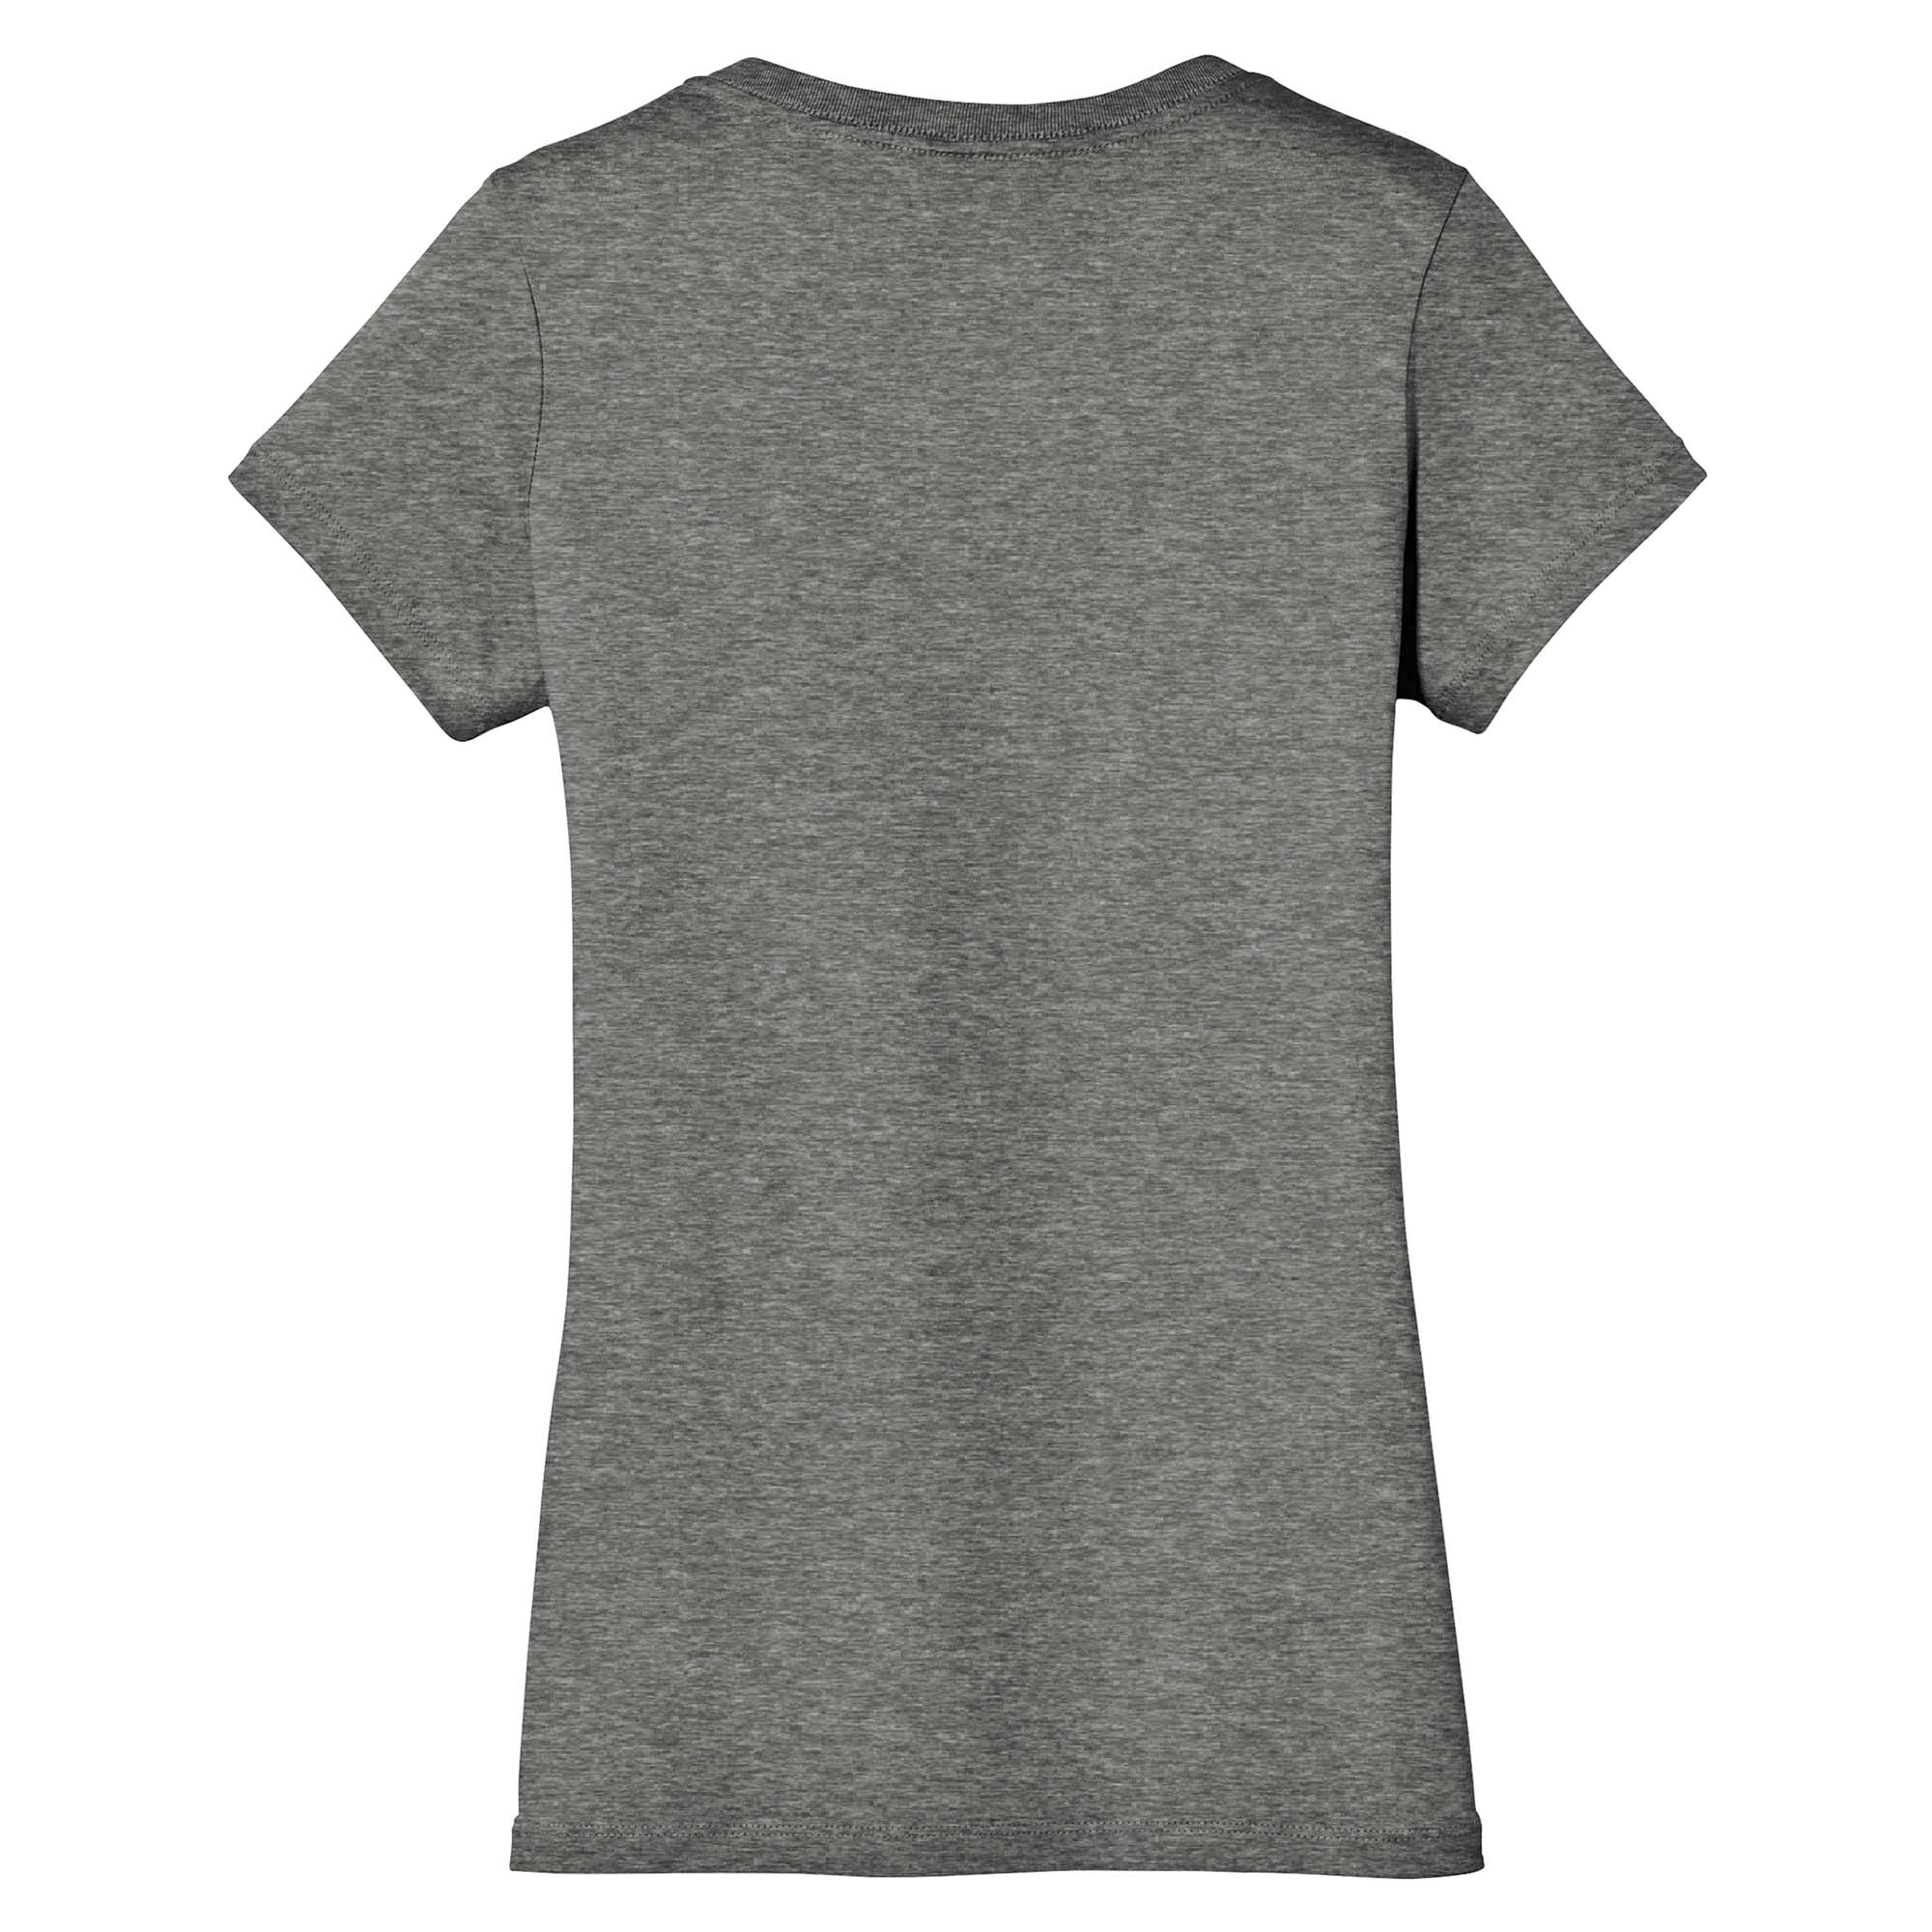 District DM1170L Women's Perfect Weight V-Neck Tee - Heathered Nickel ...